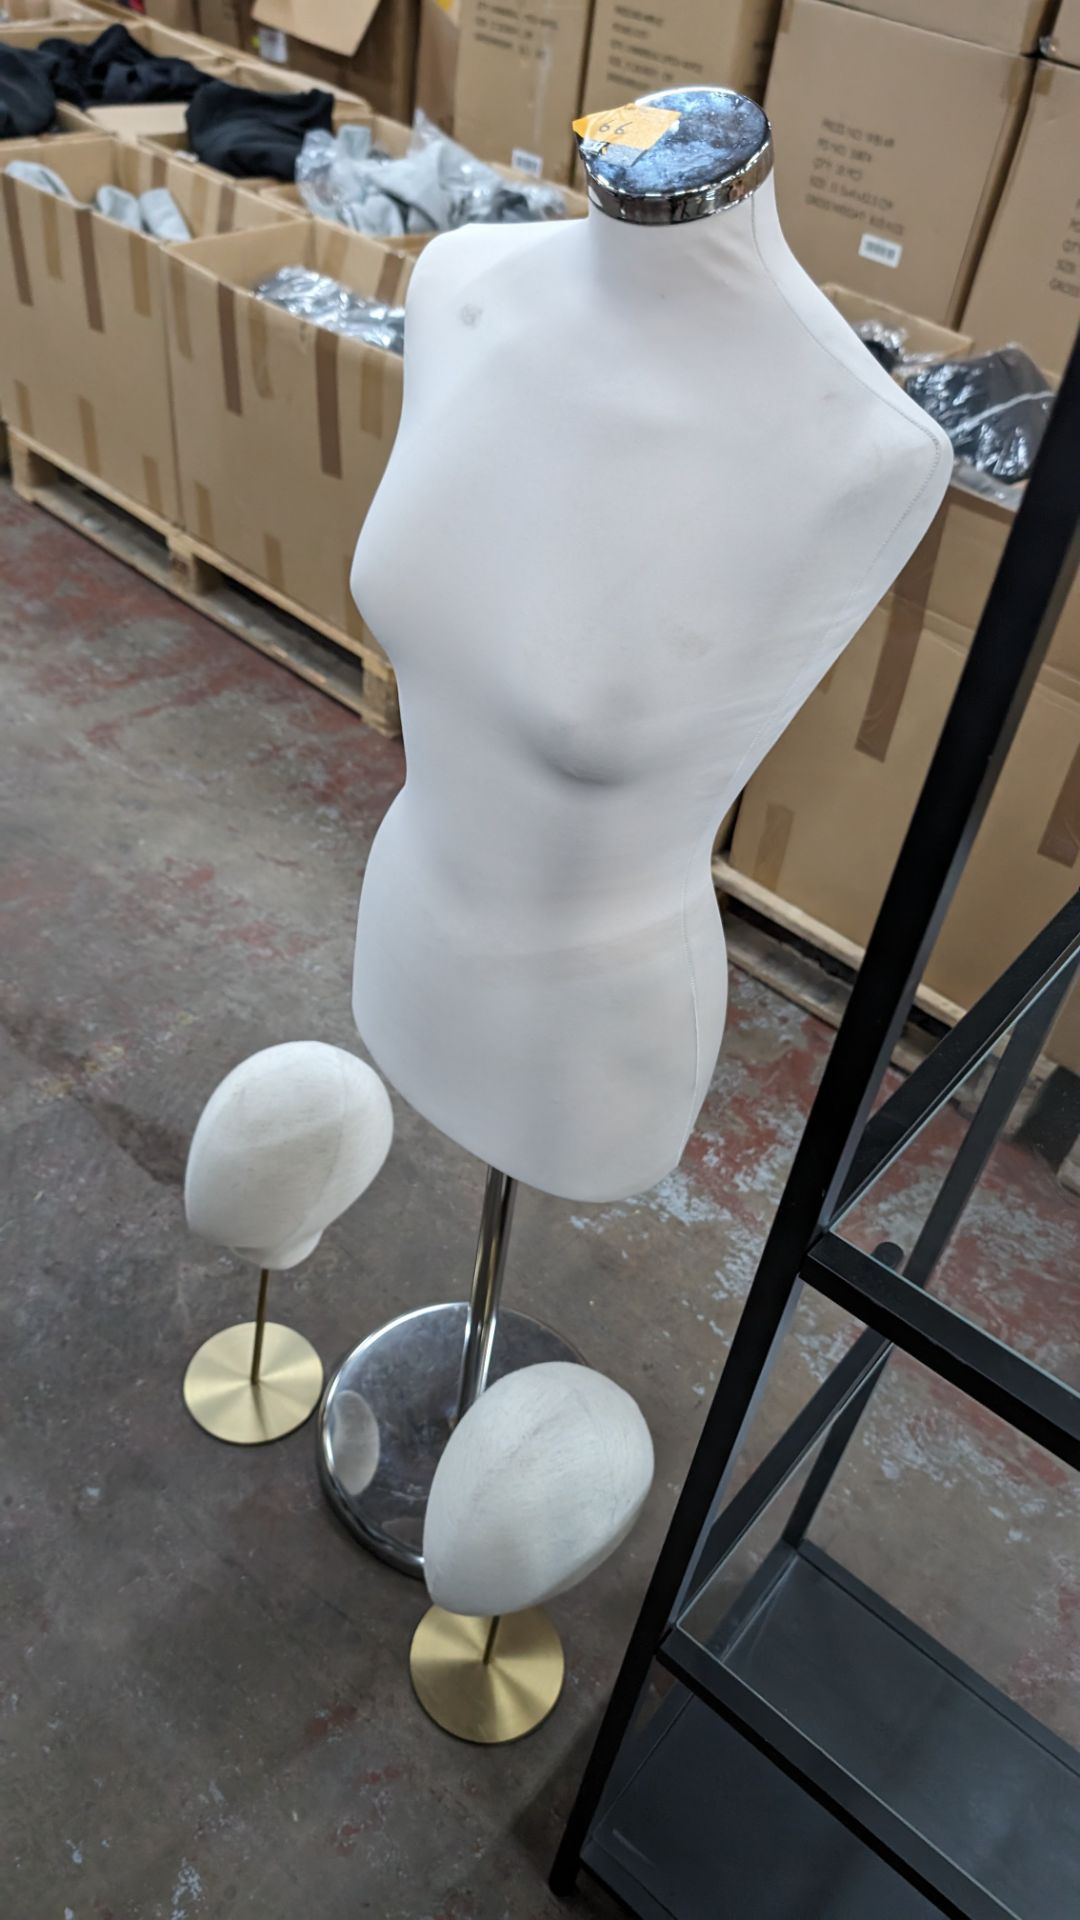 Tailor's dummy plus two 'head' hat display items